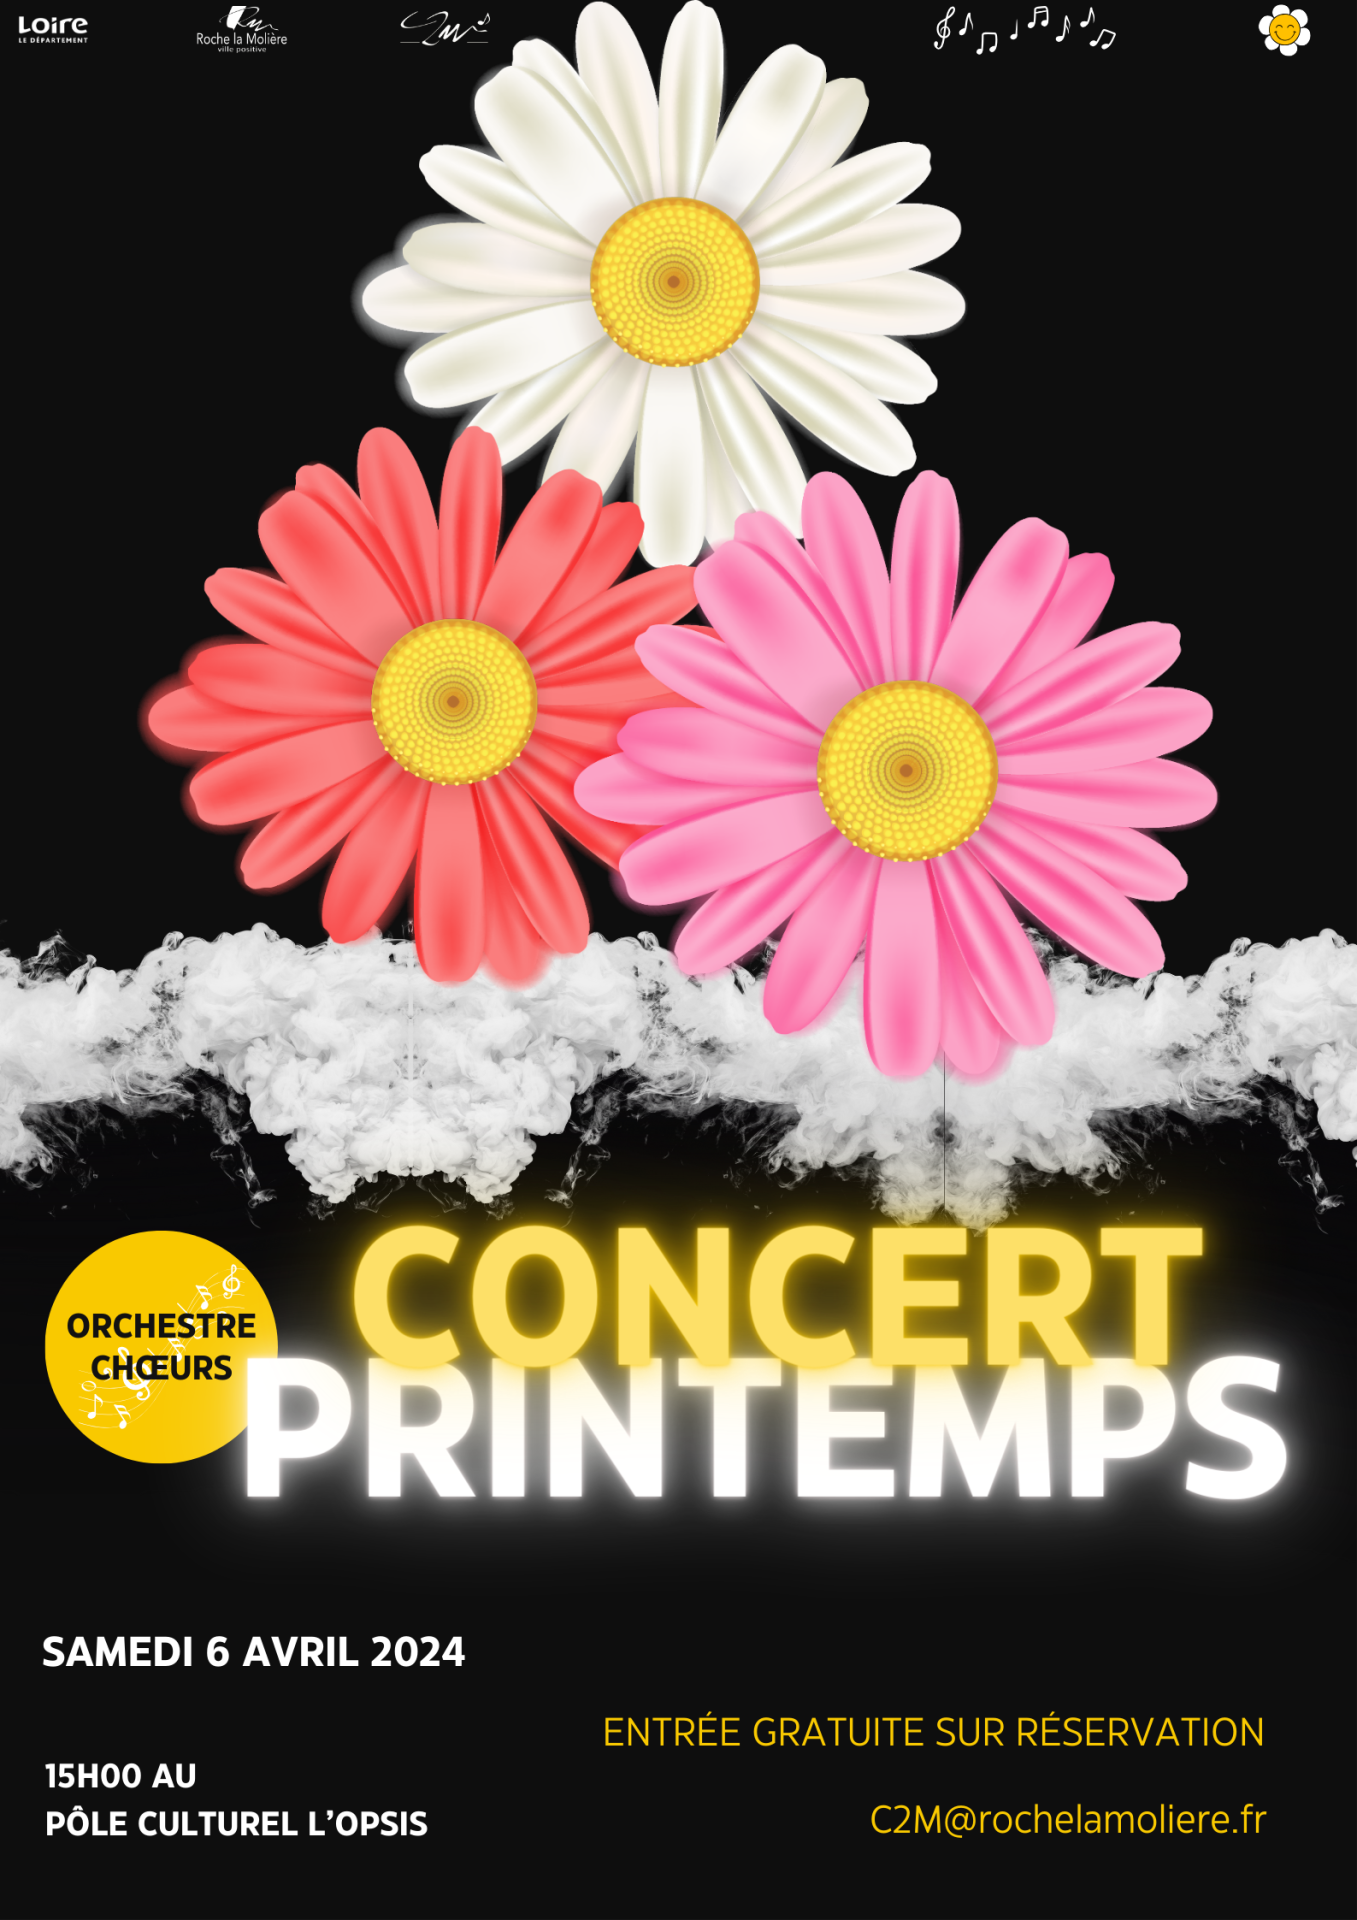 Blue and yellow modern music concert poster